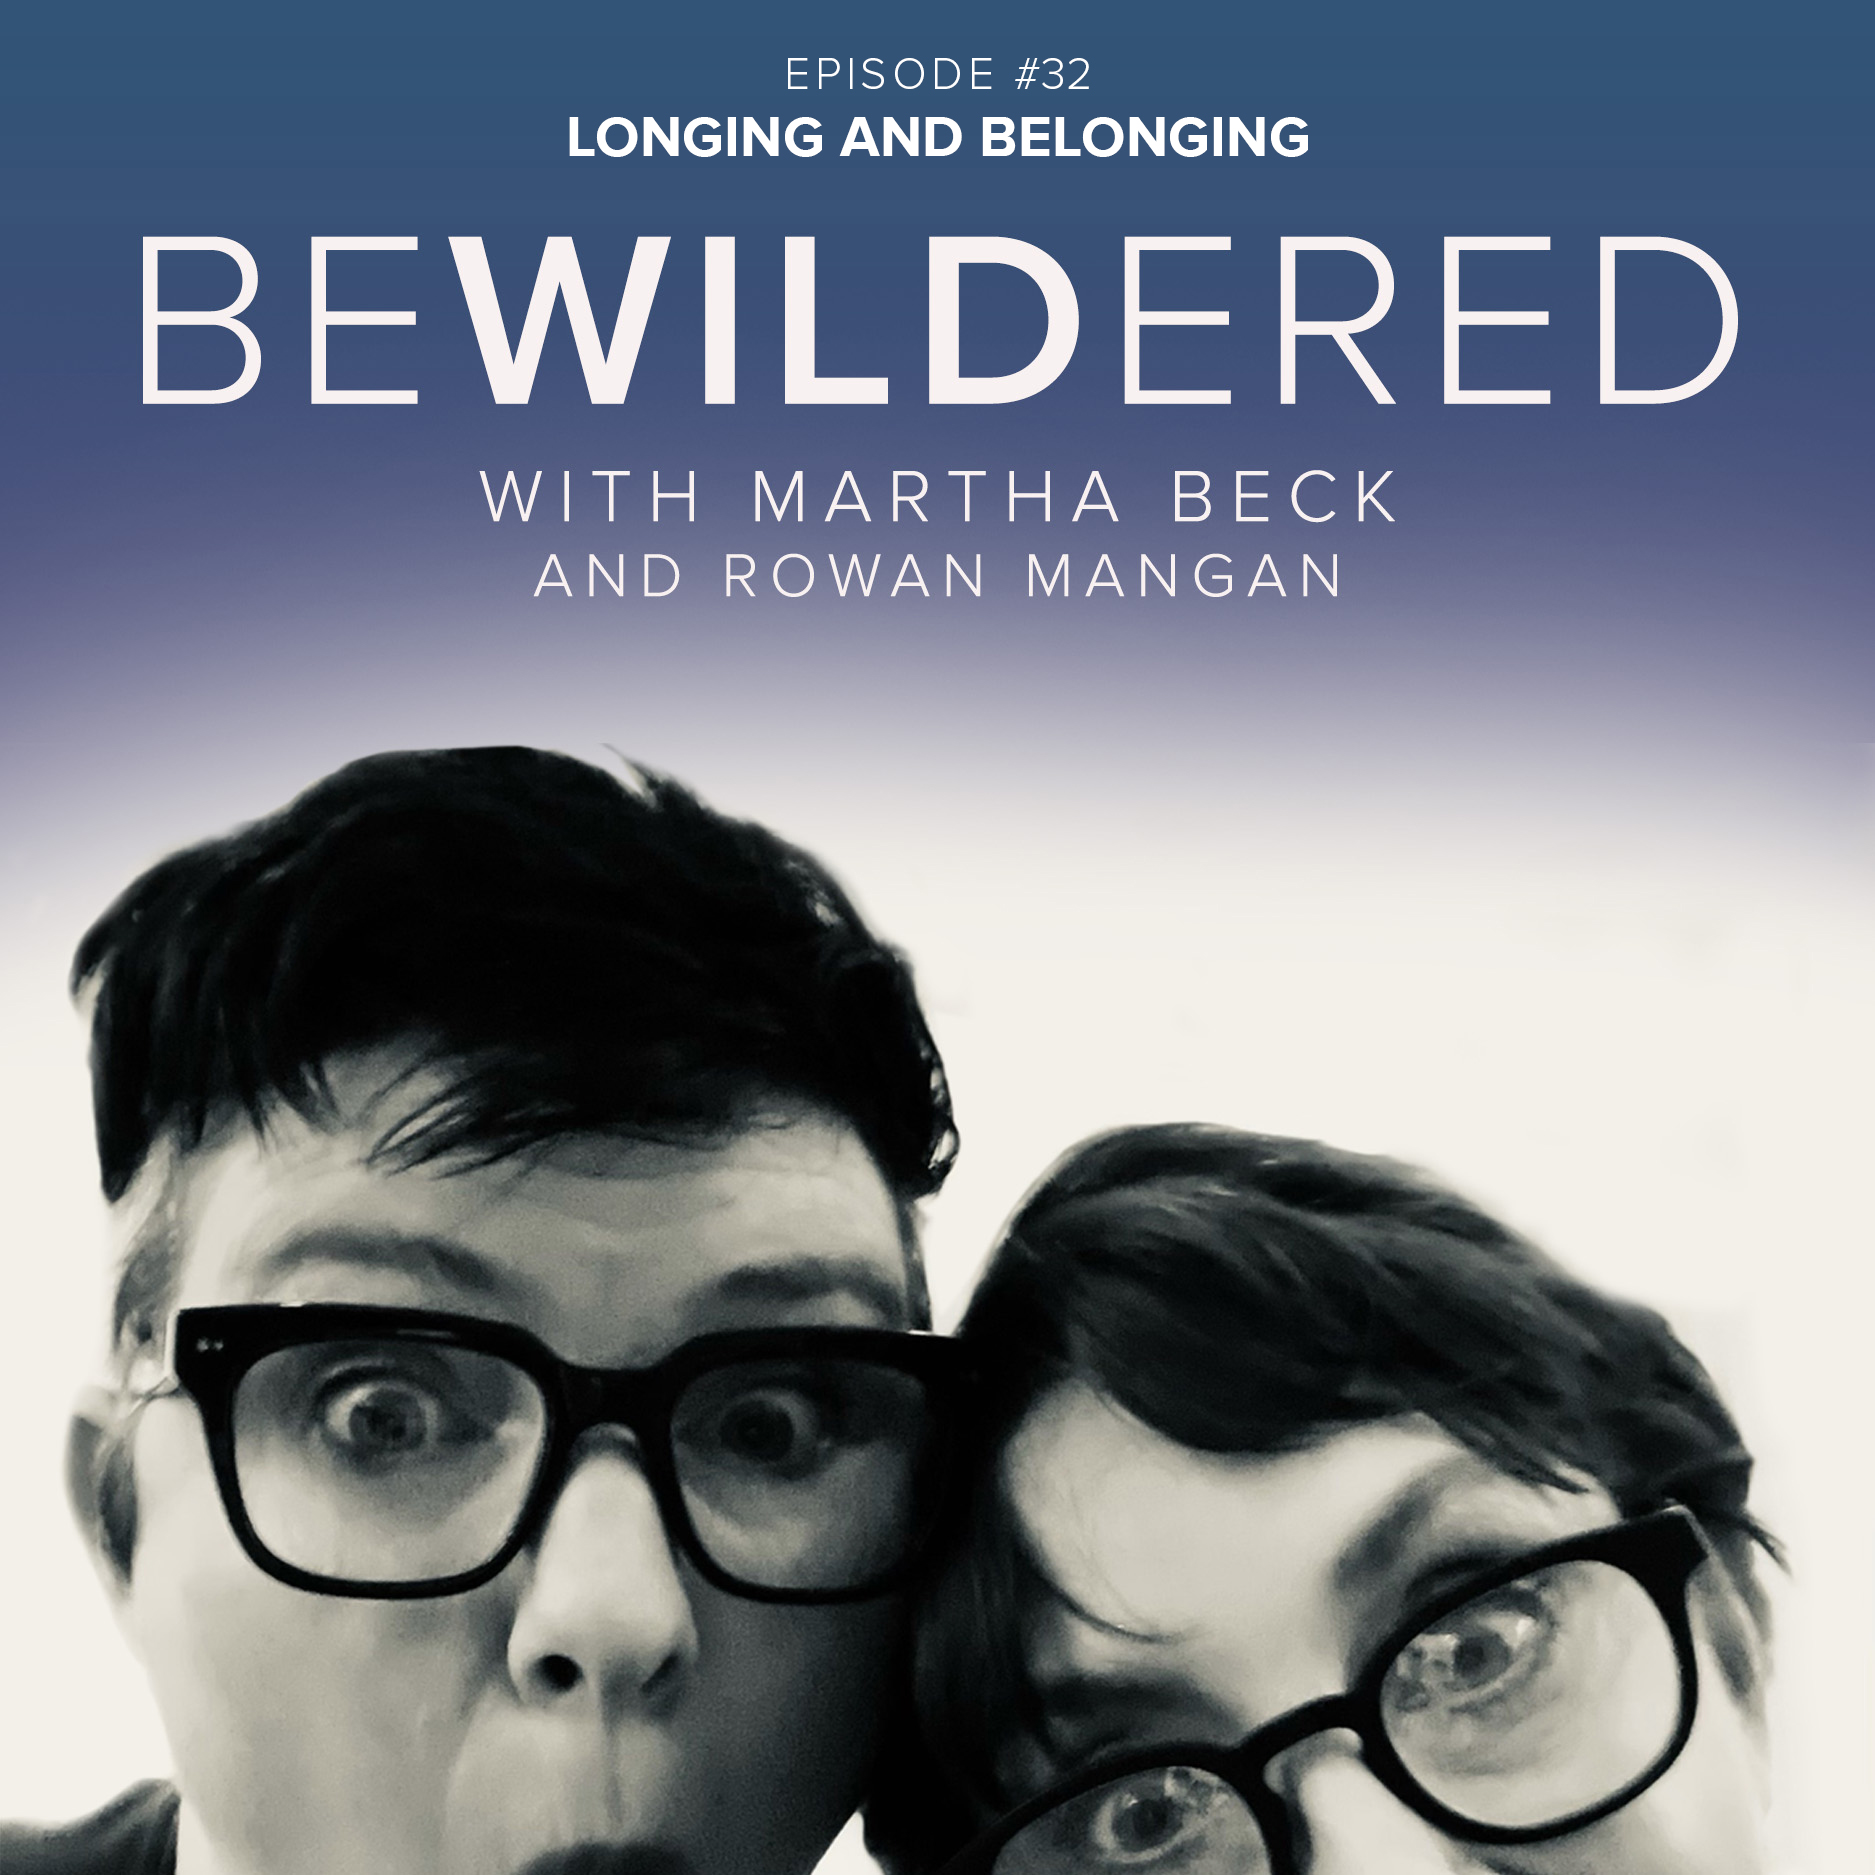 Image for Episode #32 Longing and Belonging for the Bewildered Podcast with Martha Beck and Rowan Mangan